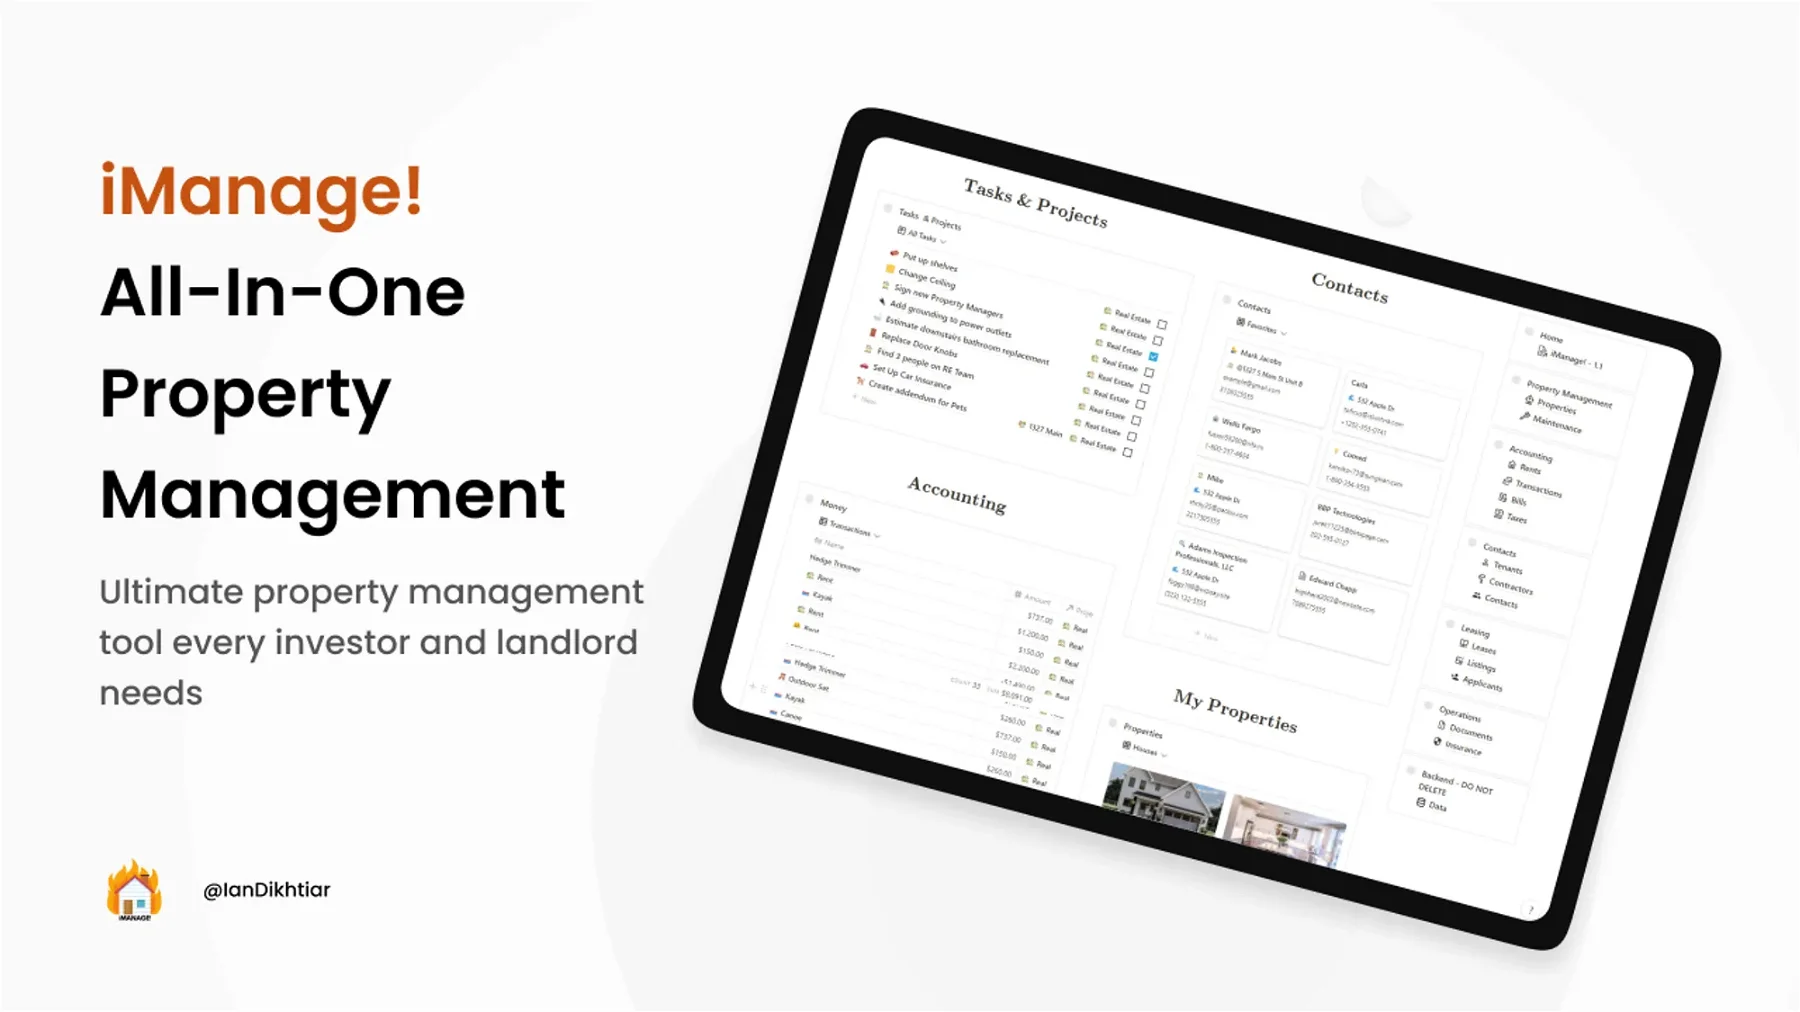 iManage! - All-in-One Property Management Tool